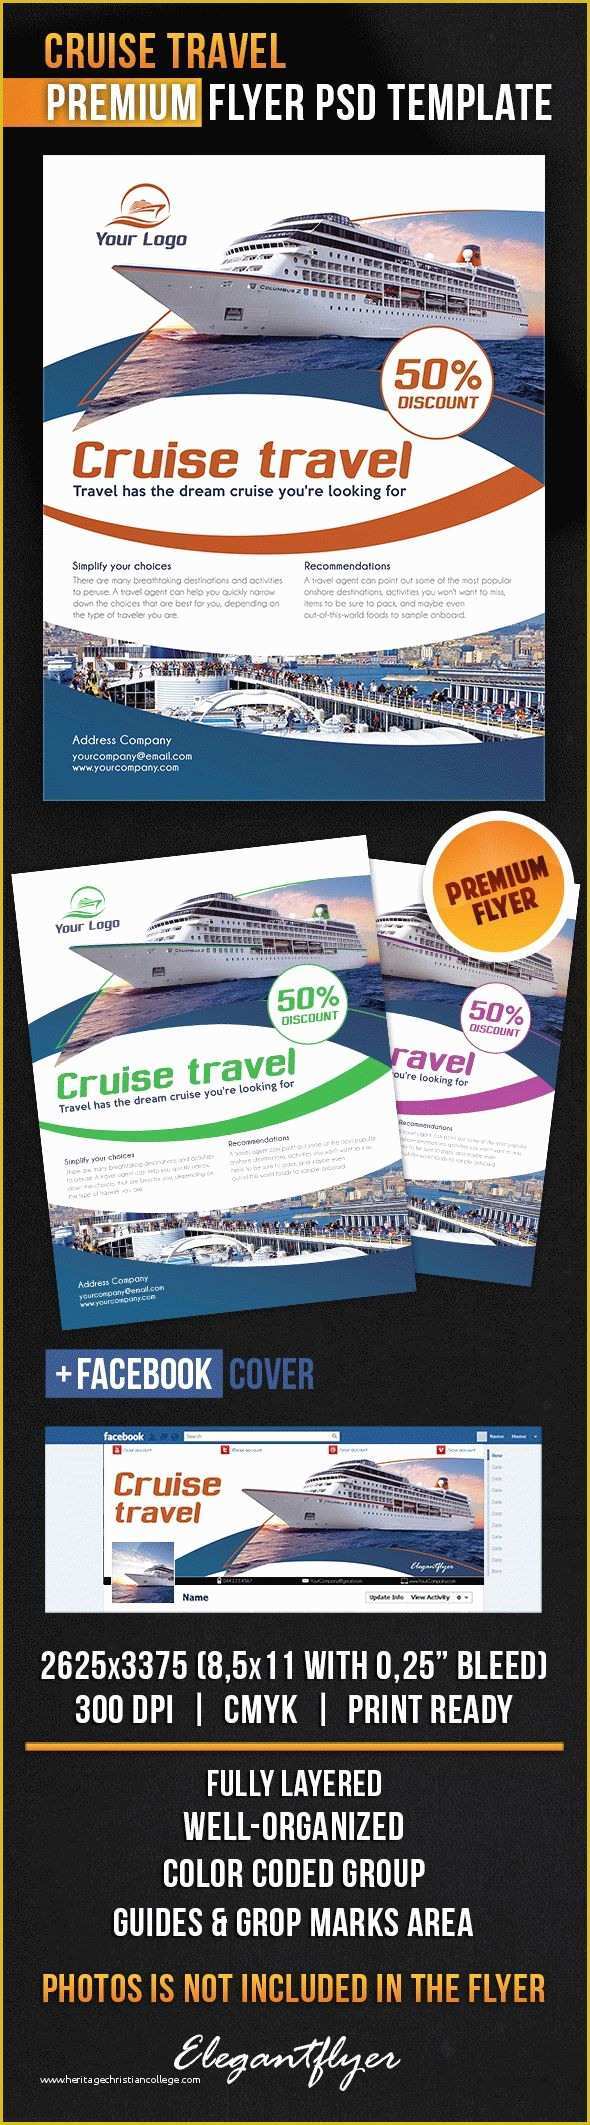 Cruise Flyer Template Free Of Cruise Travel – Flyer Psd Template – by Elegantflyer